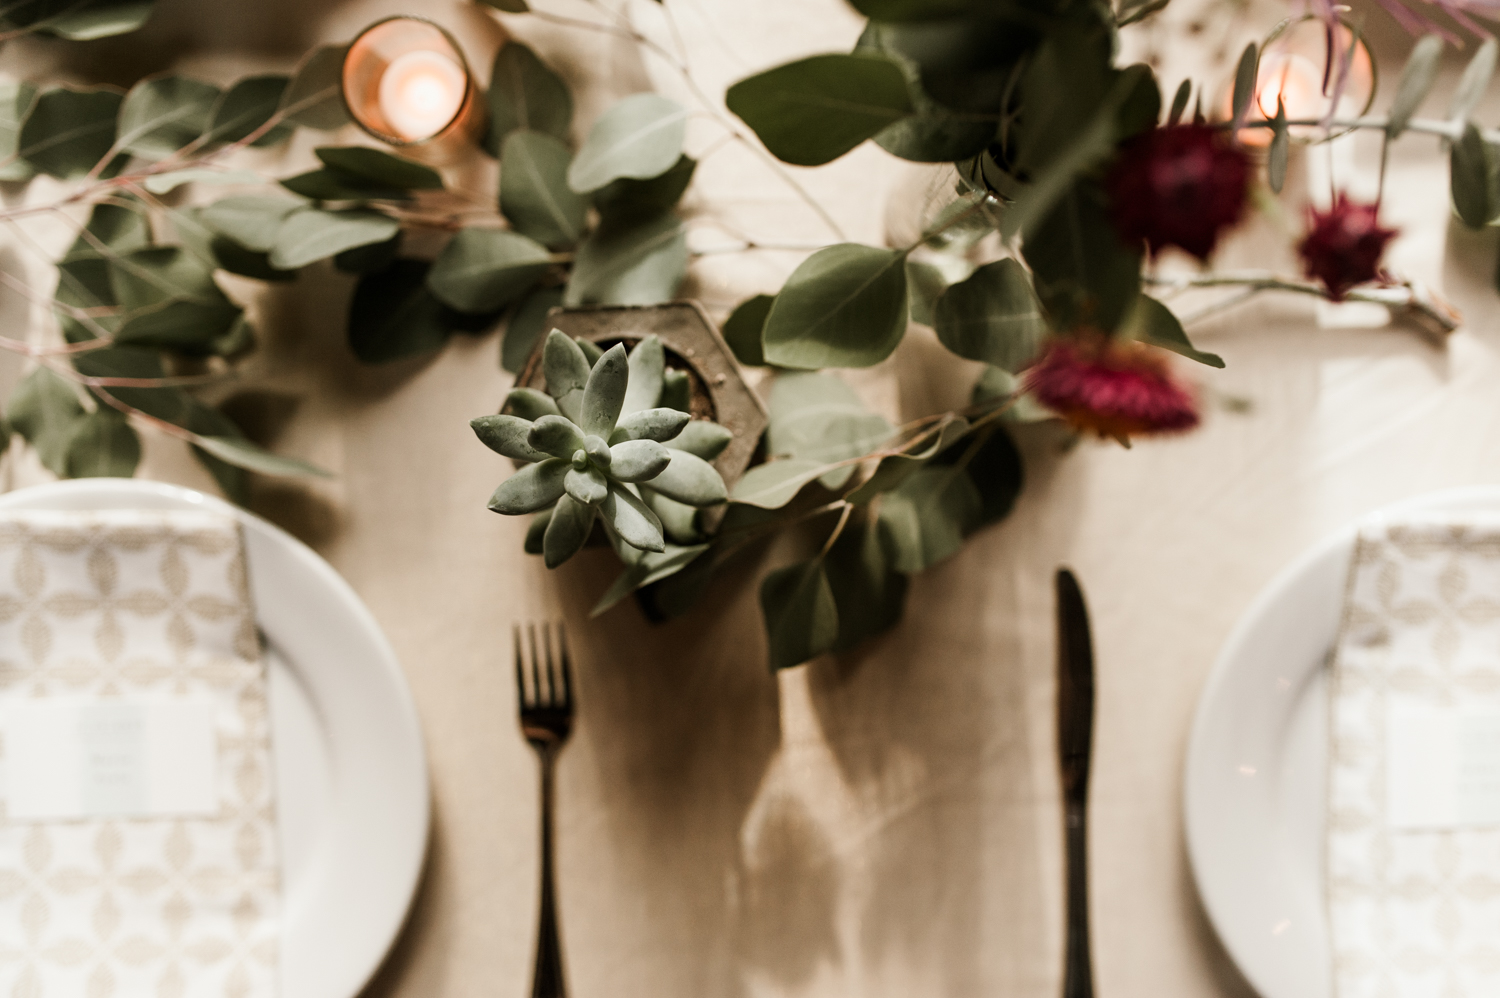 Flower details of a bohemian wedding table setting. By Chico Wedding Photographer Briana Morrison